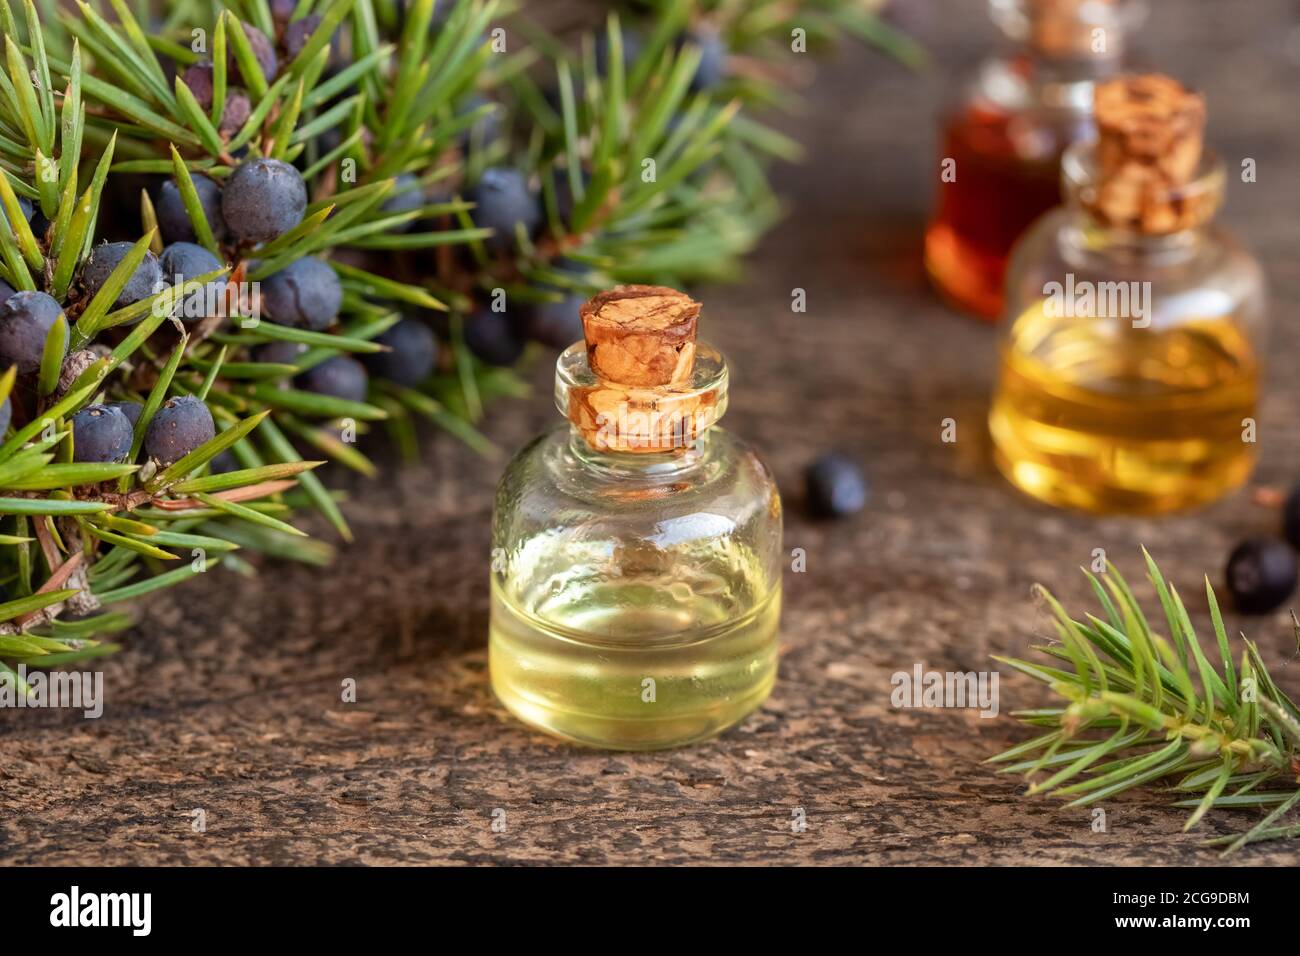 Bottles of essential oil with fresh juniper twigs and berries on a wooden background Stock Photo